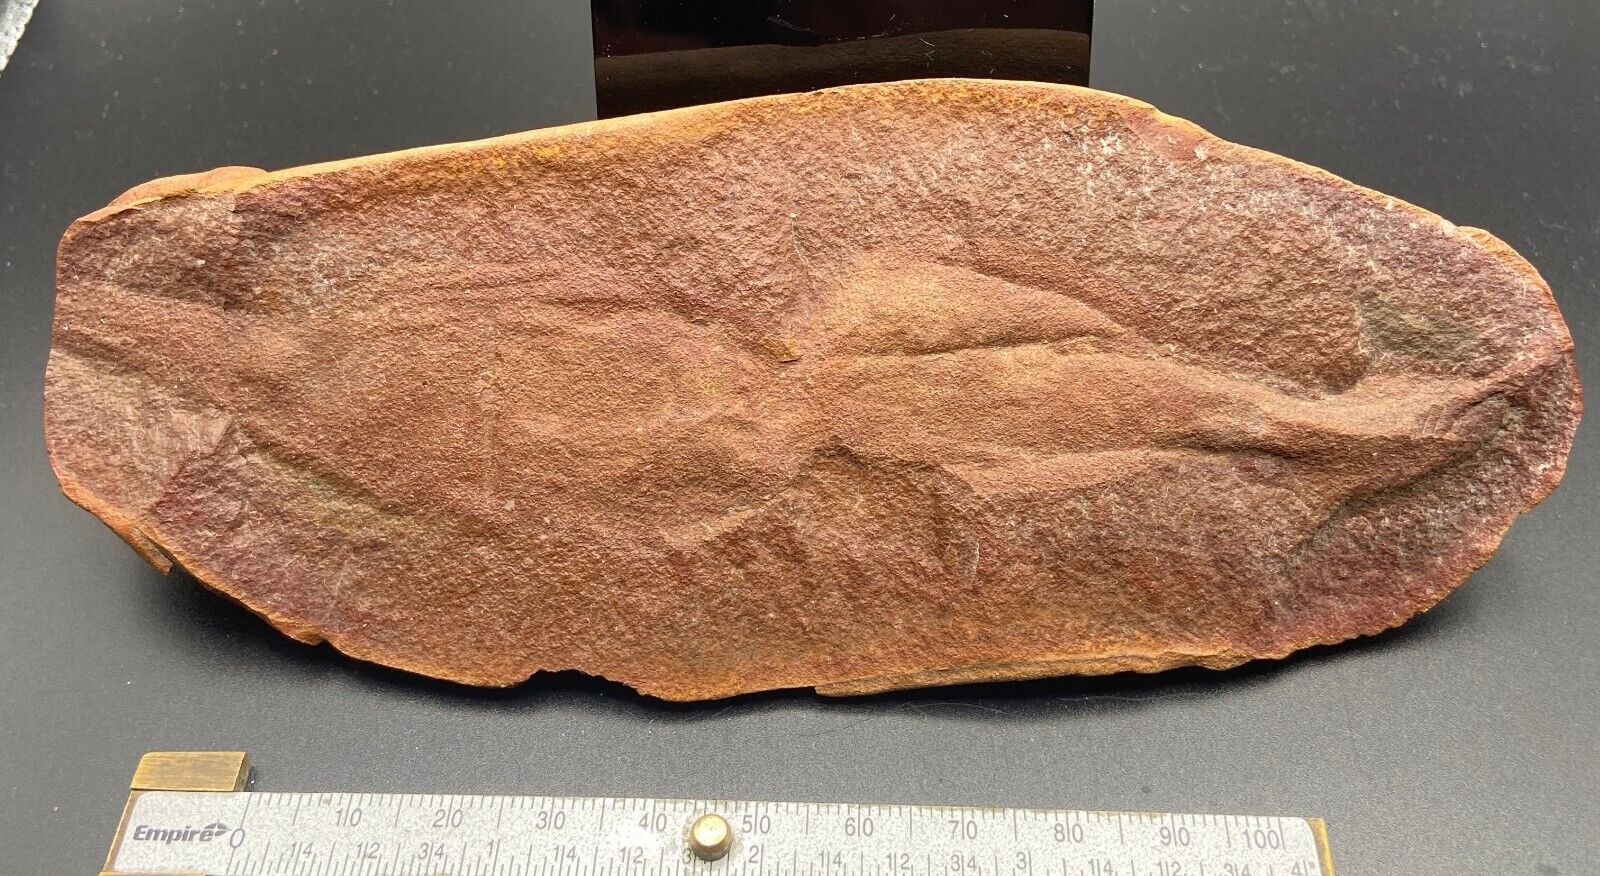 Fossil Tully Monster - Mazon Creek, IL tullimonstrum - one side nodule only